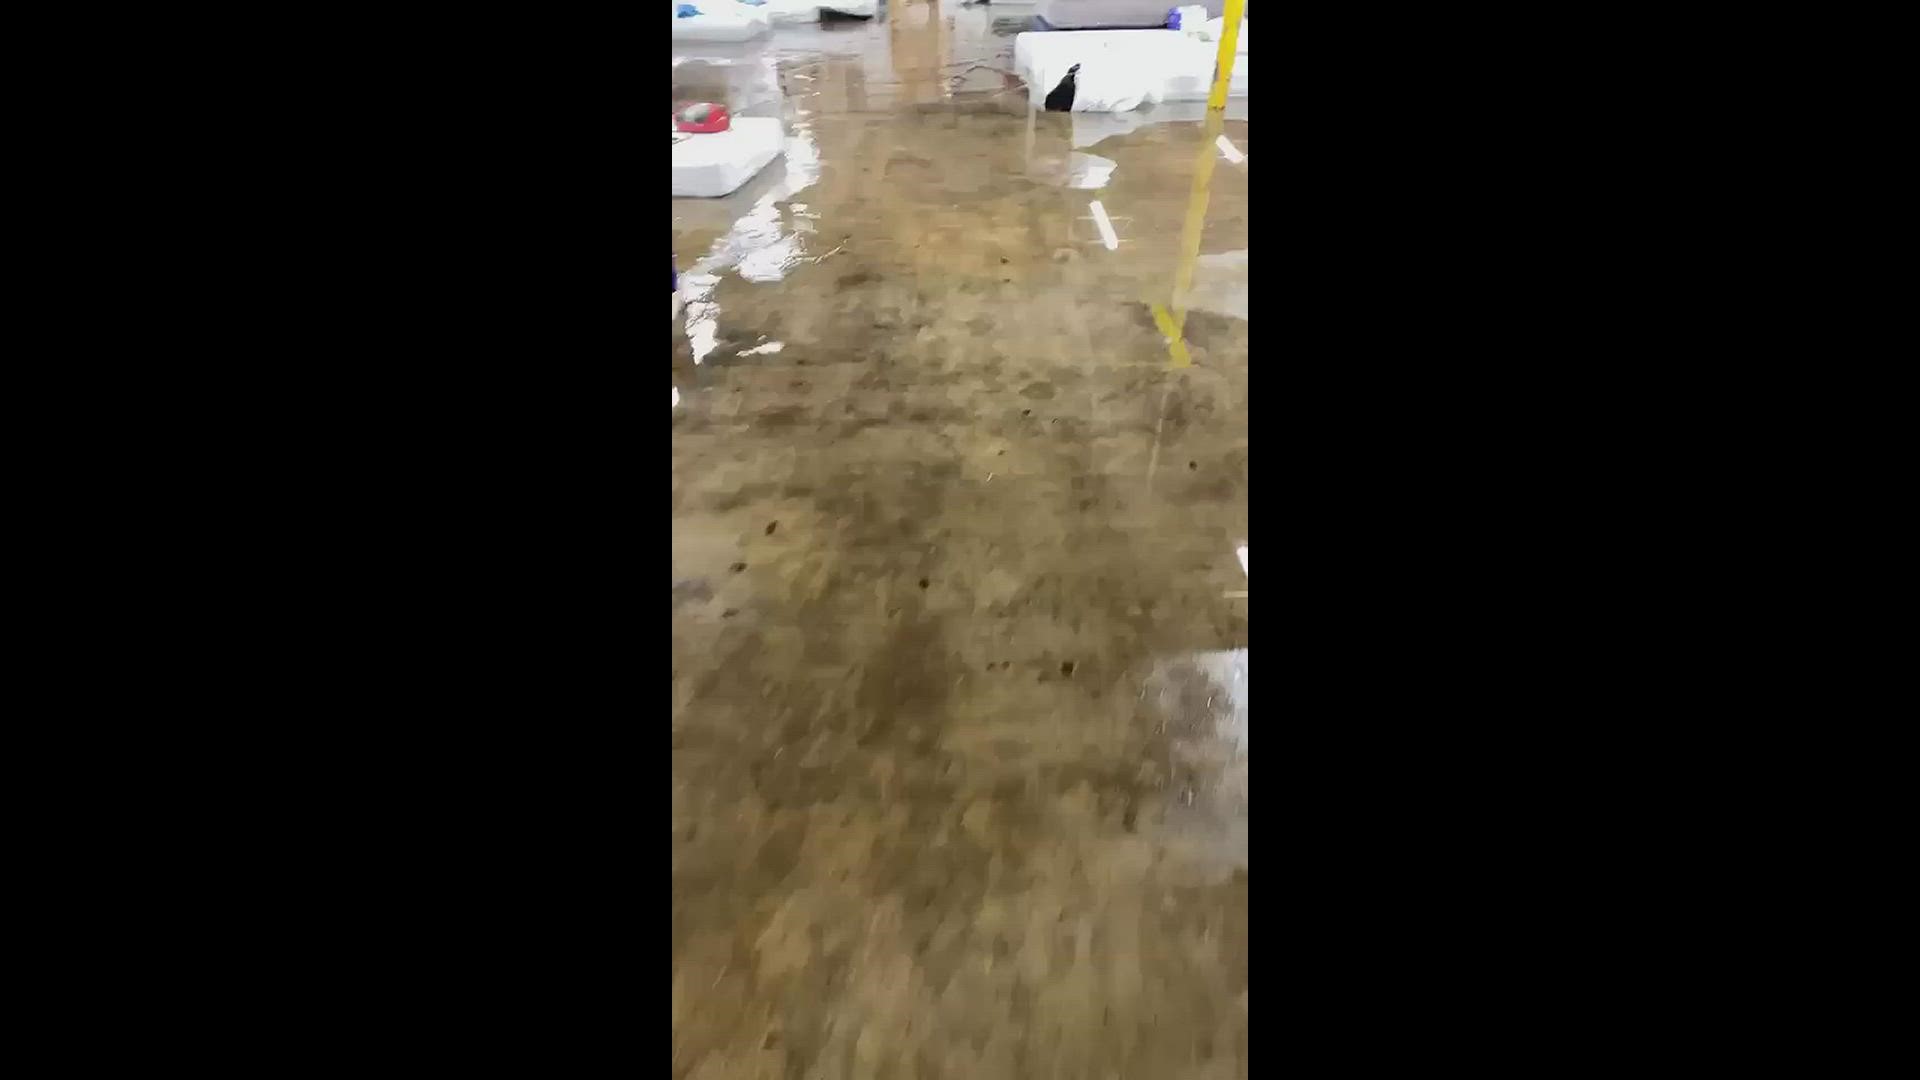 New video shows flooded conditions inside the Independence warehouse turned nursing home during Hurricane Ida.